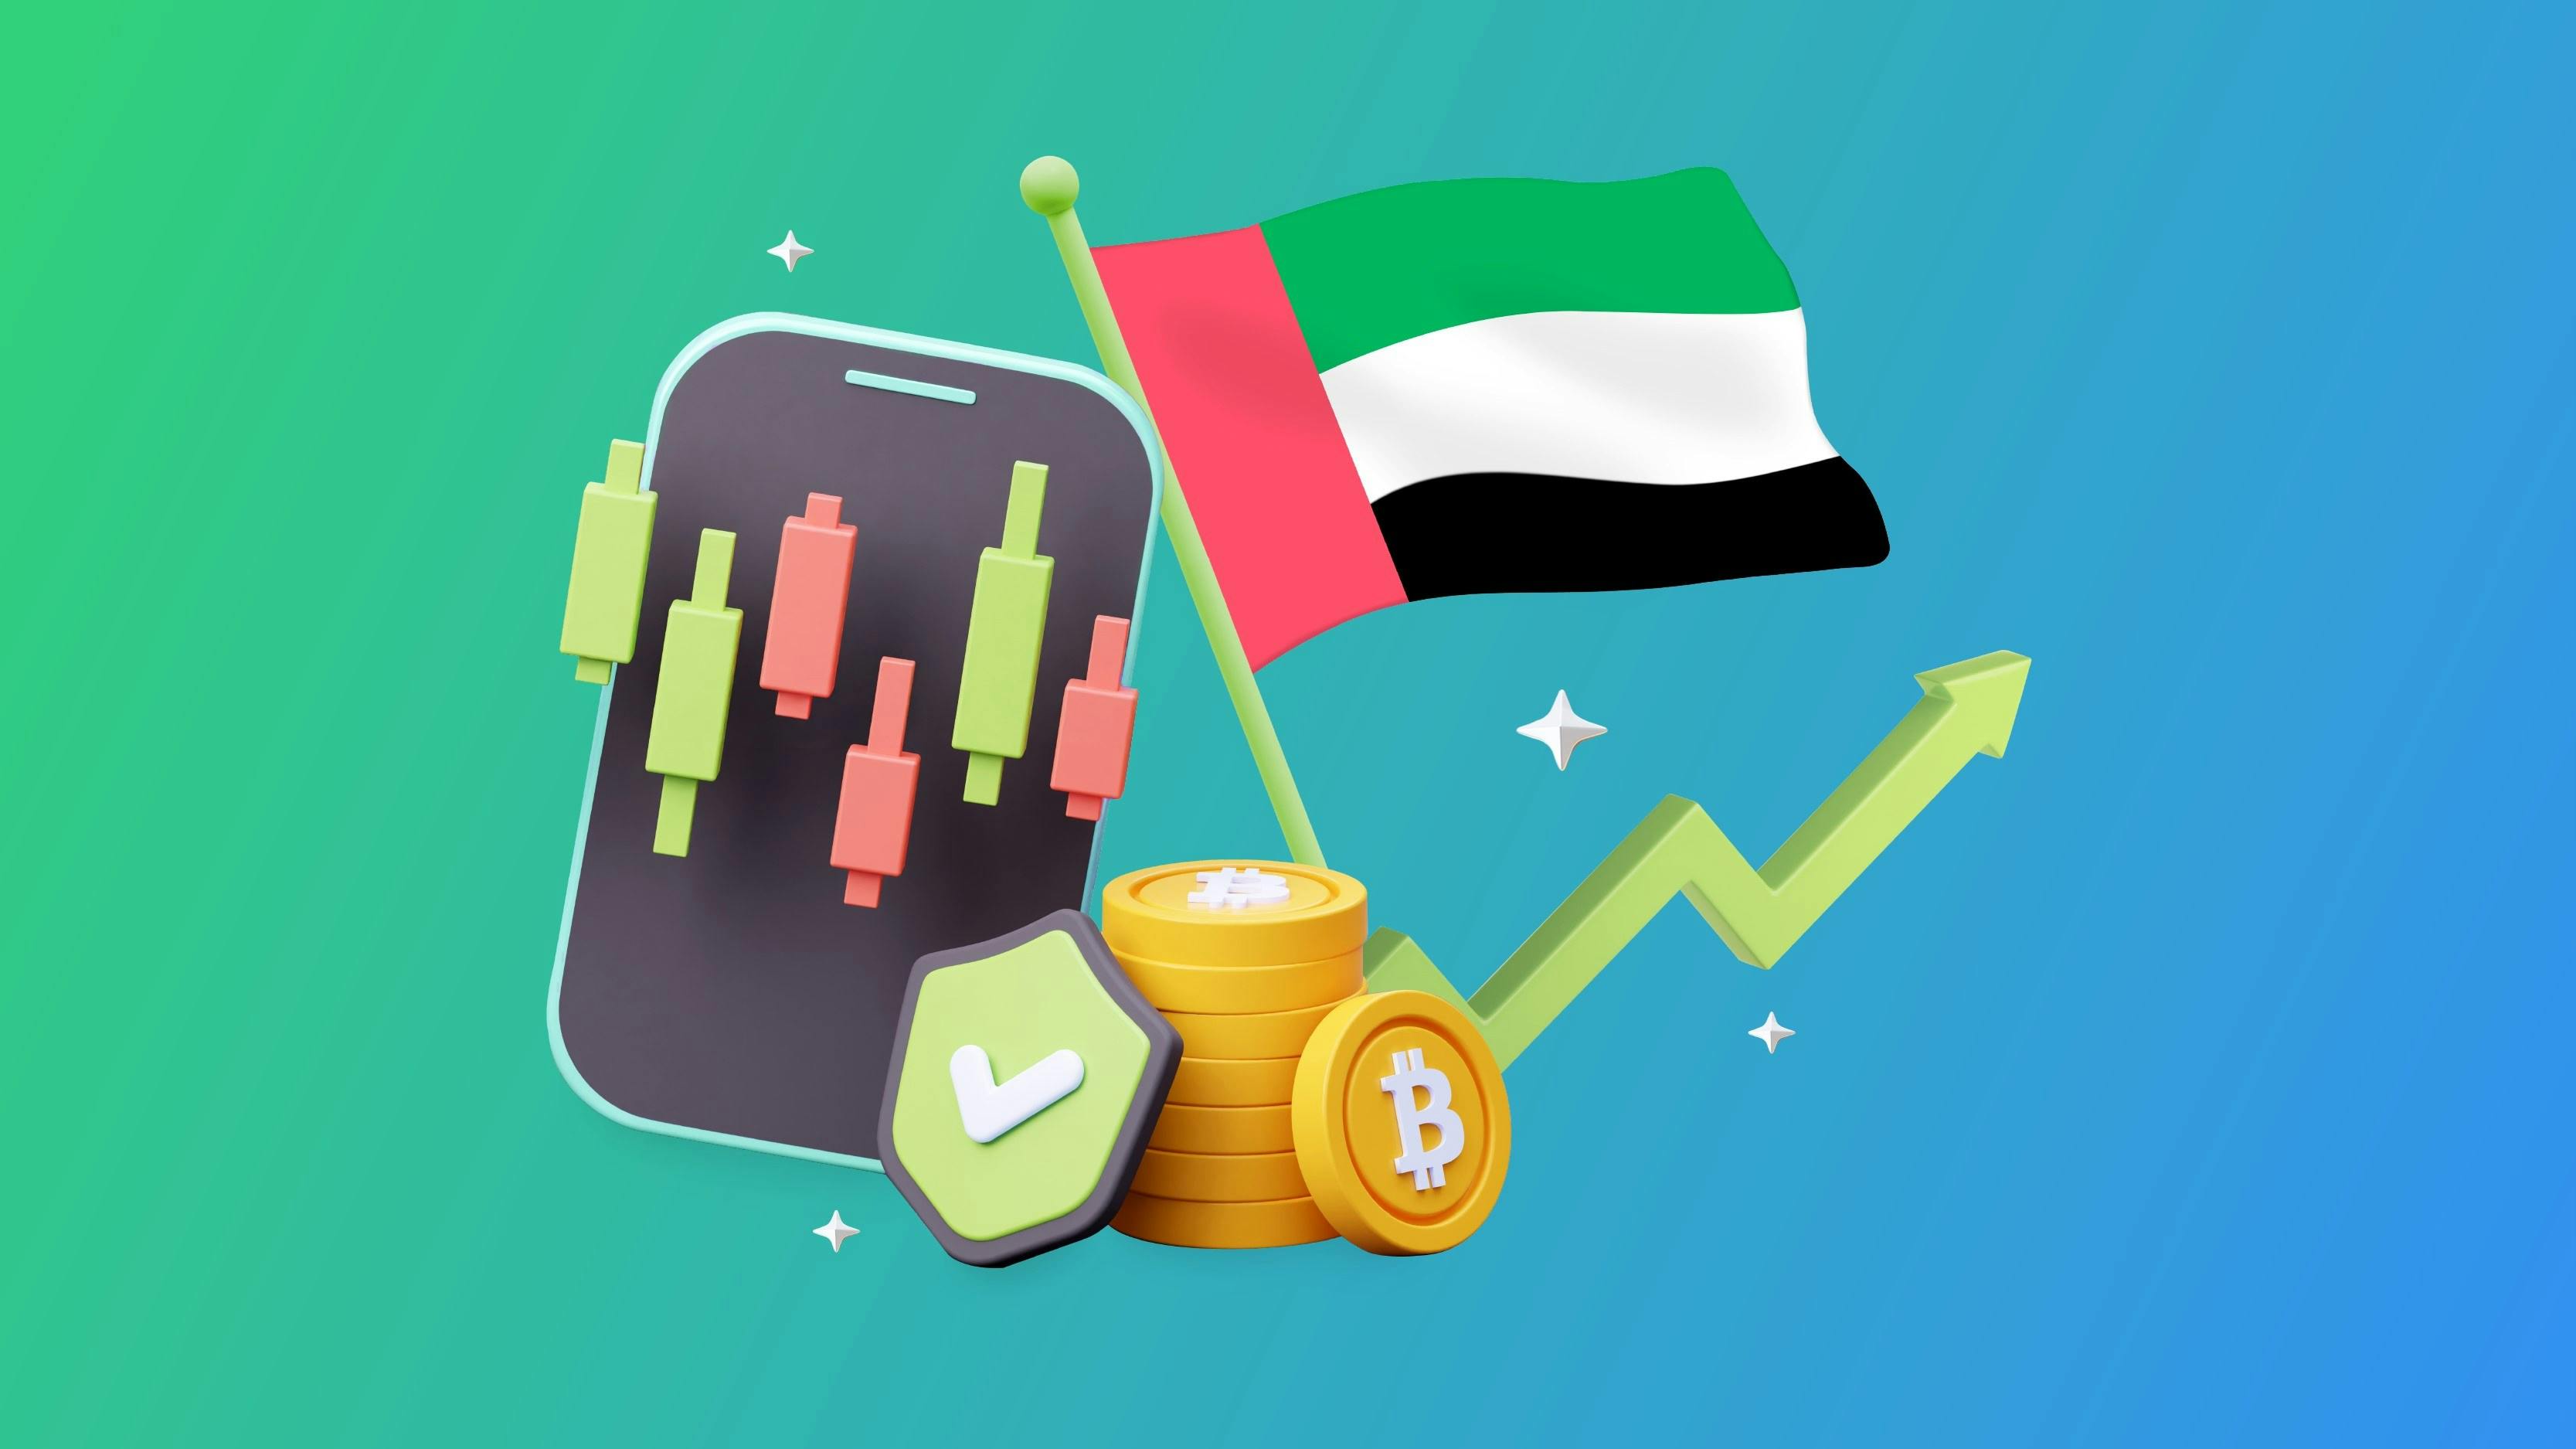 The UAE’s role in helping crypto adoption worldwide